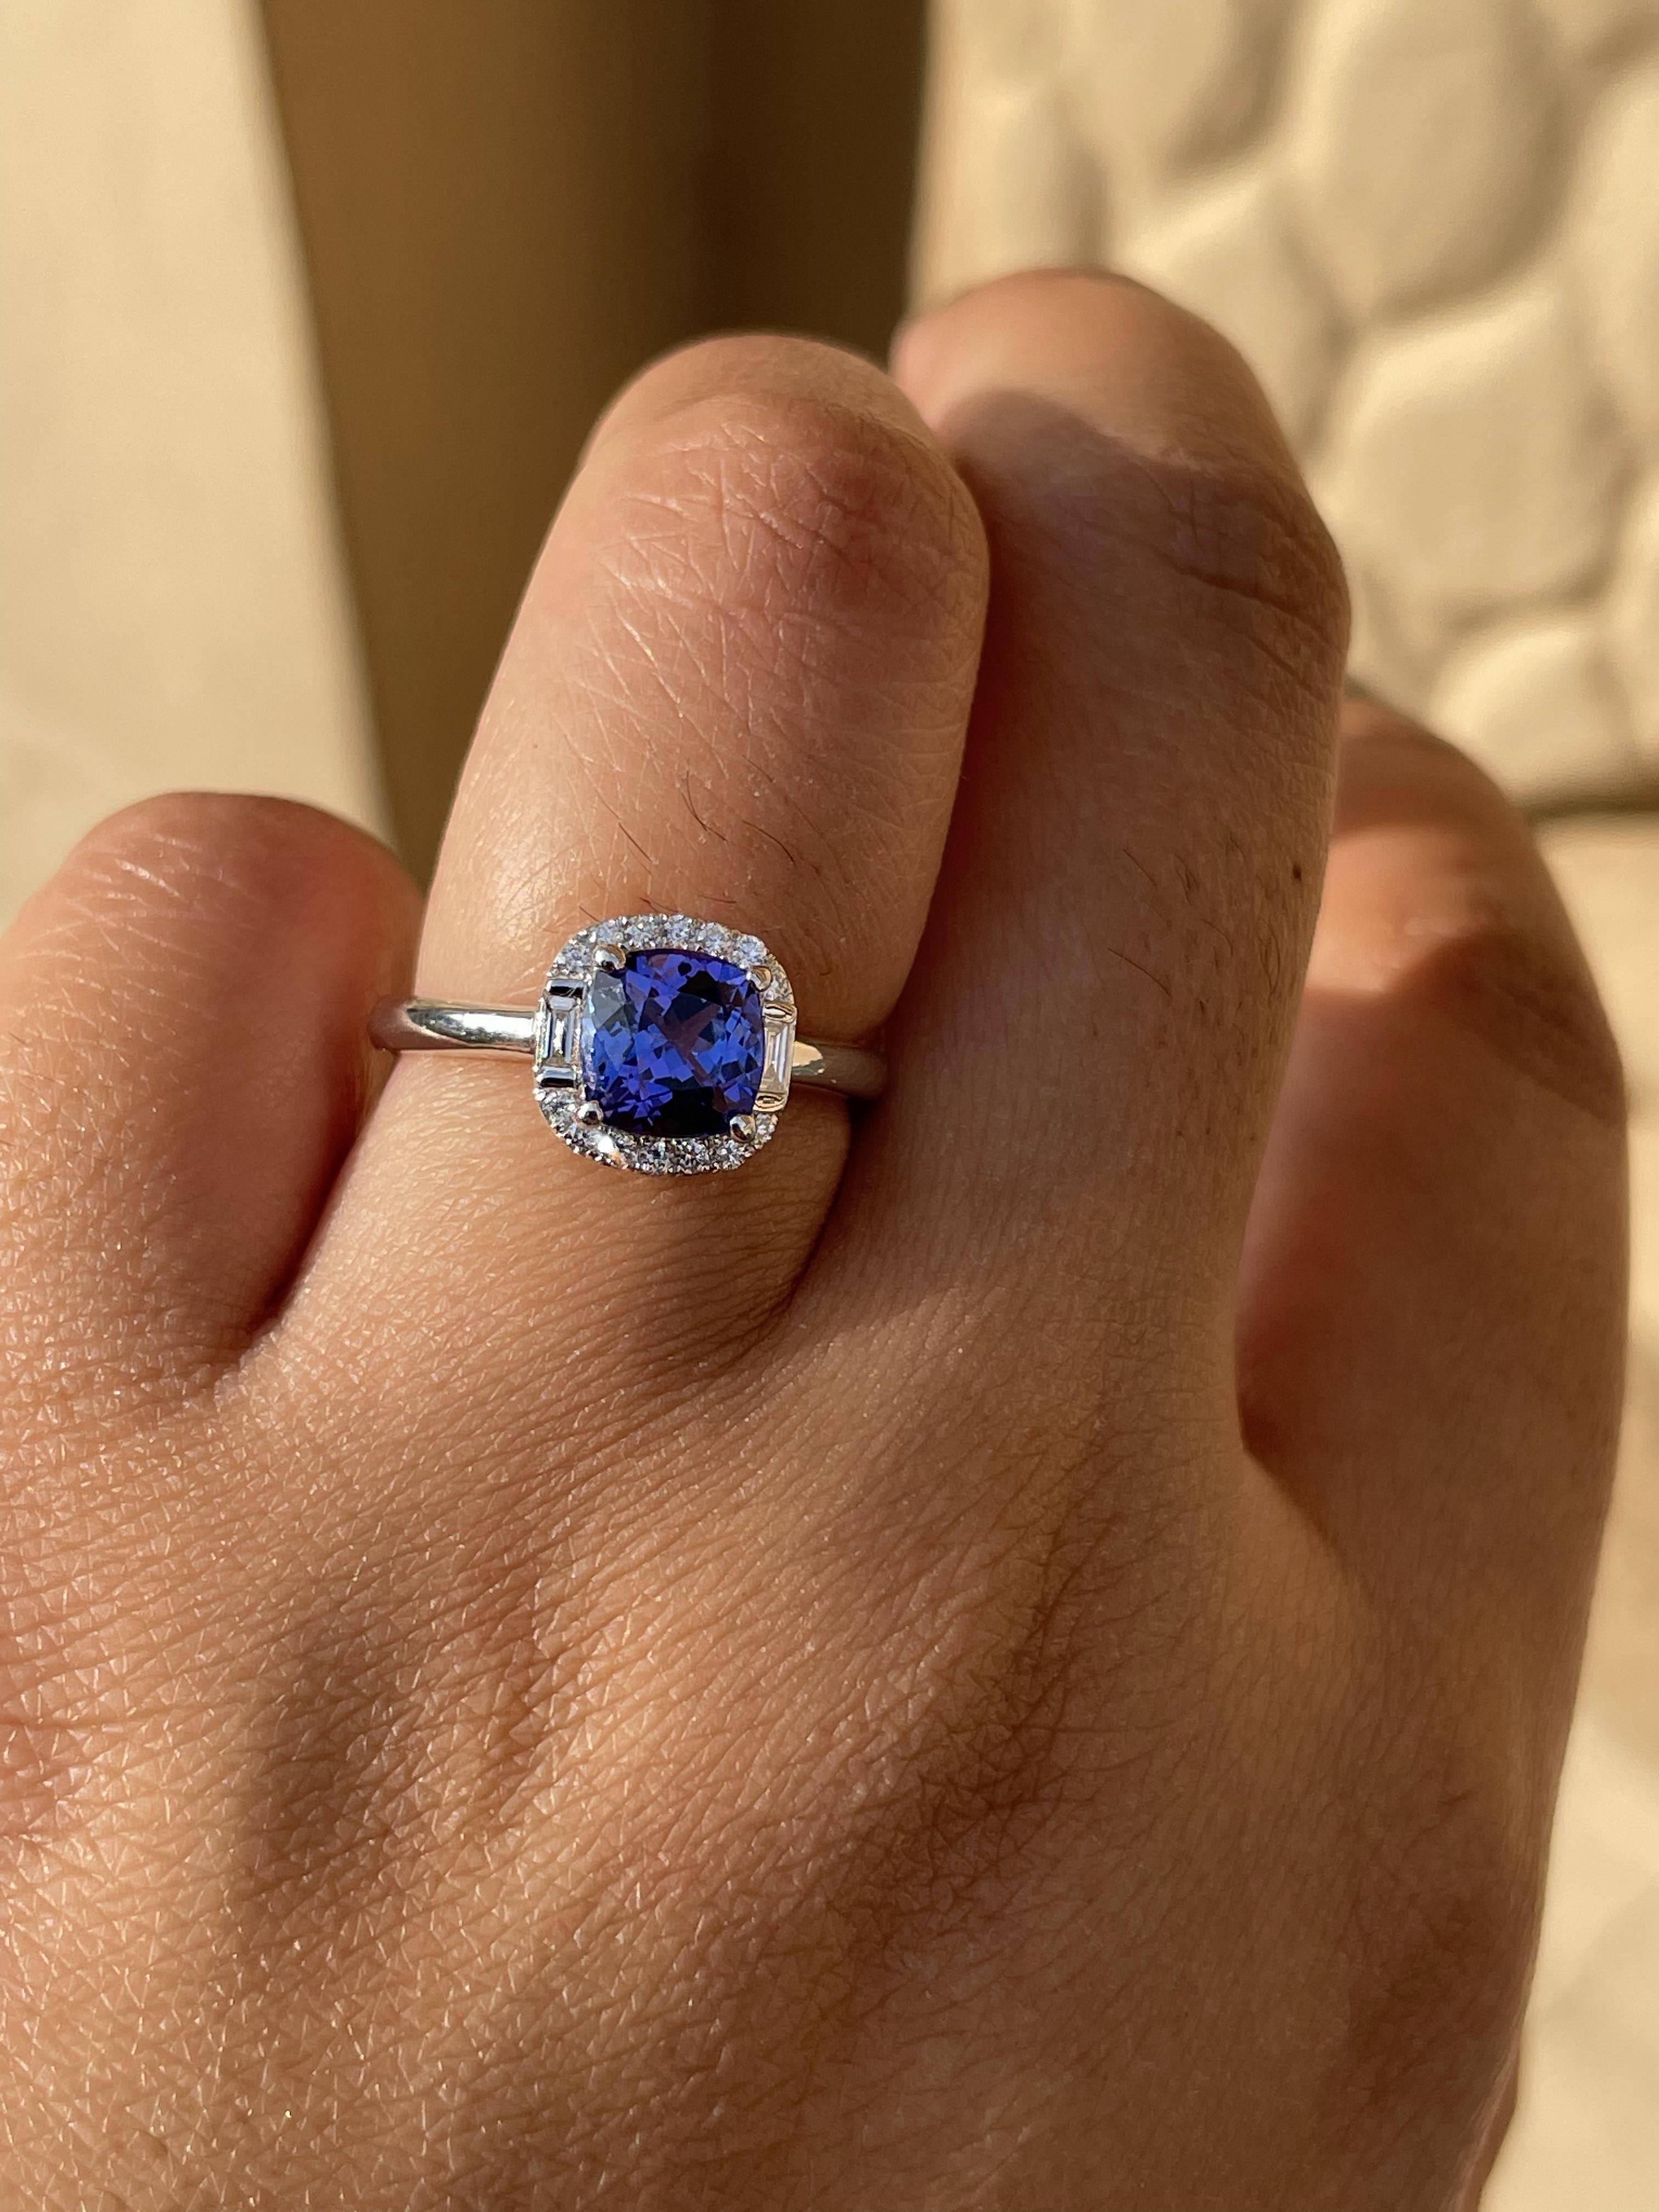 For Sale:  18k Solid White Gold Cushion Cut Tanzanite and Diamond Ring 7